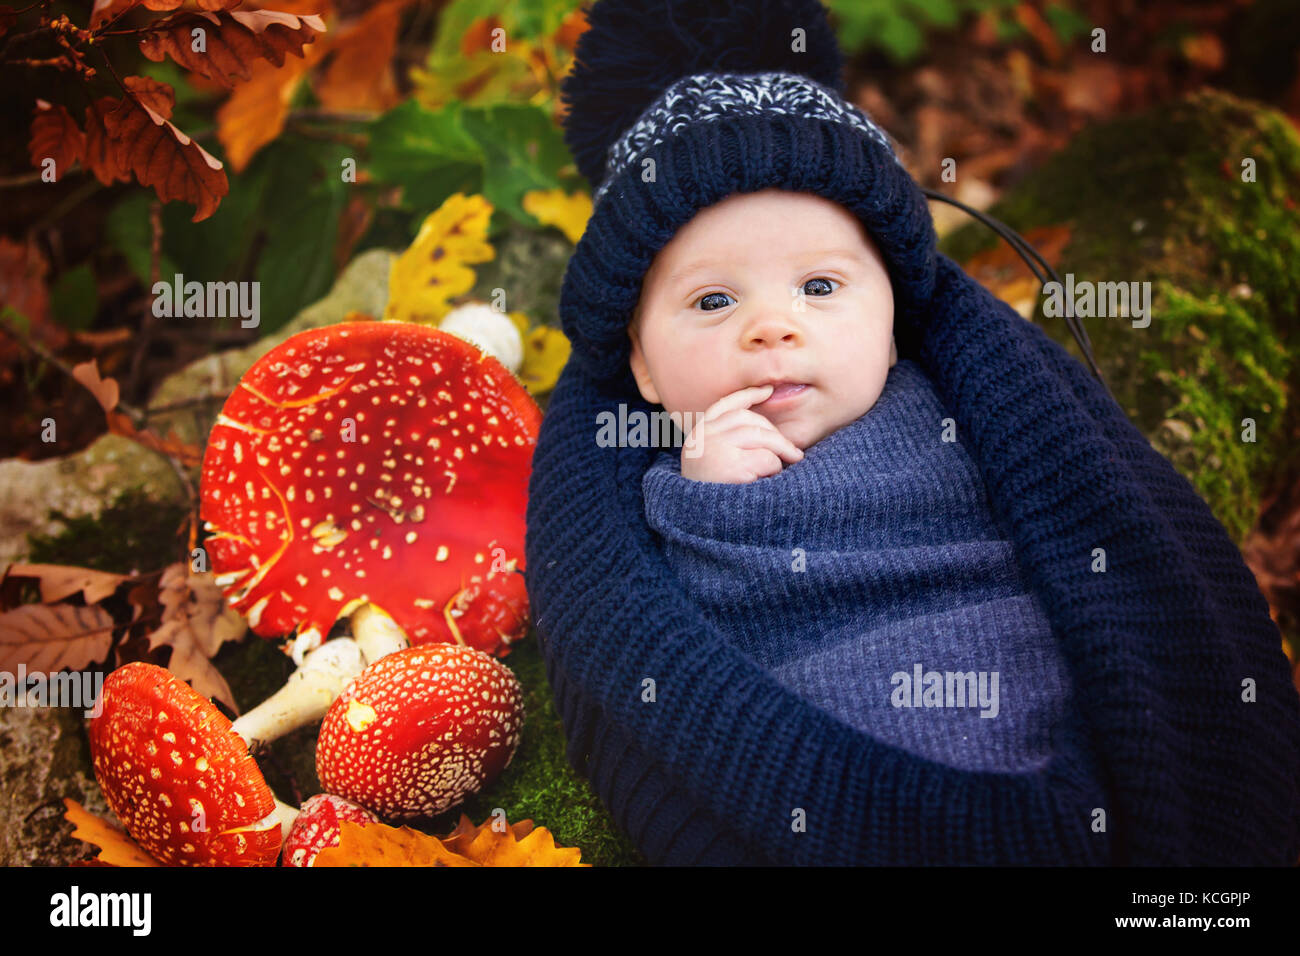 Little newborn baby boy, wrapped in scarf, lying in basket in forest, Amanita Muscaria mushrooms next to him Stock Photo